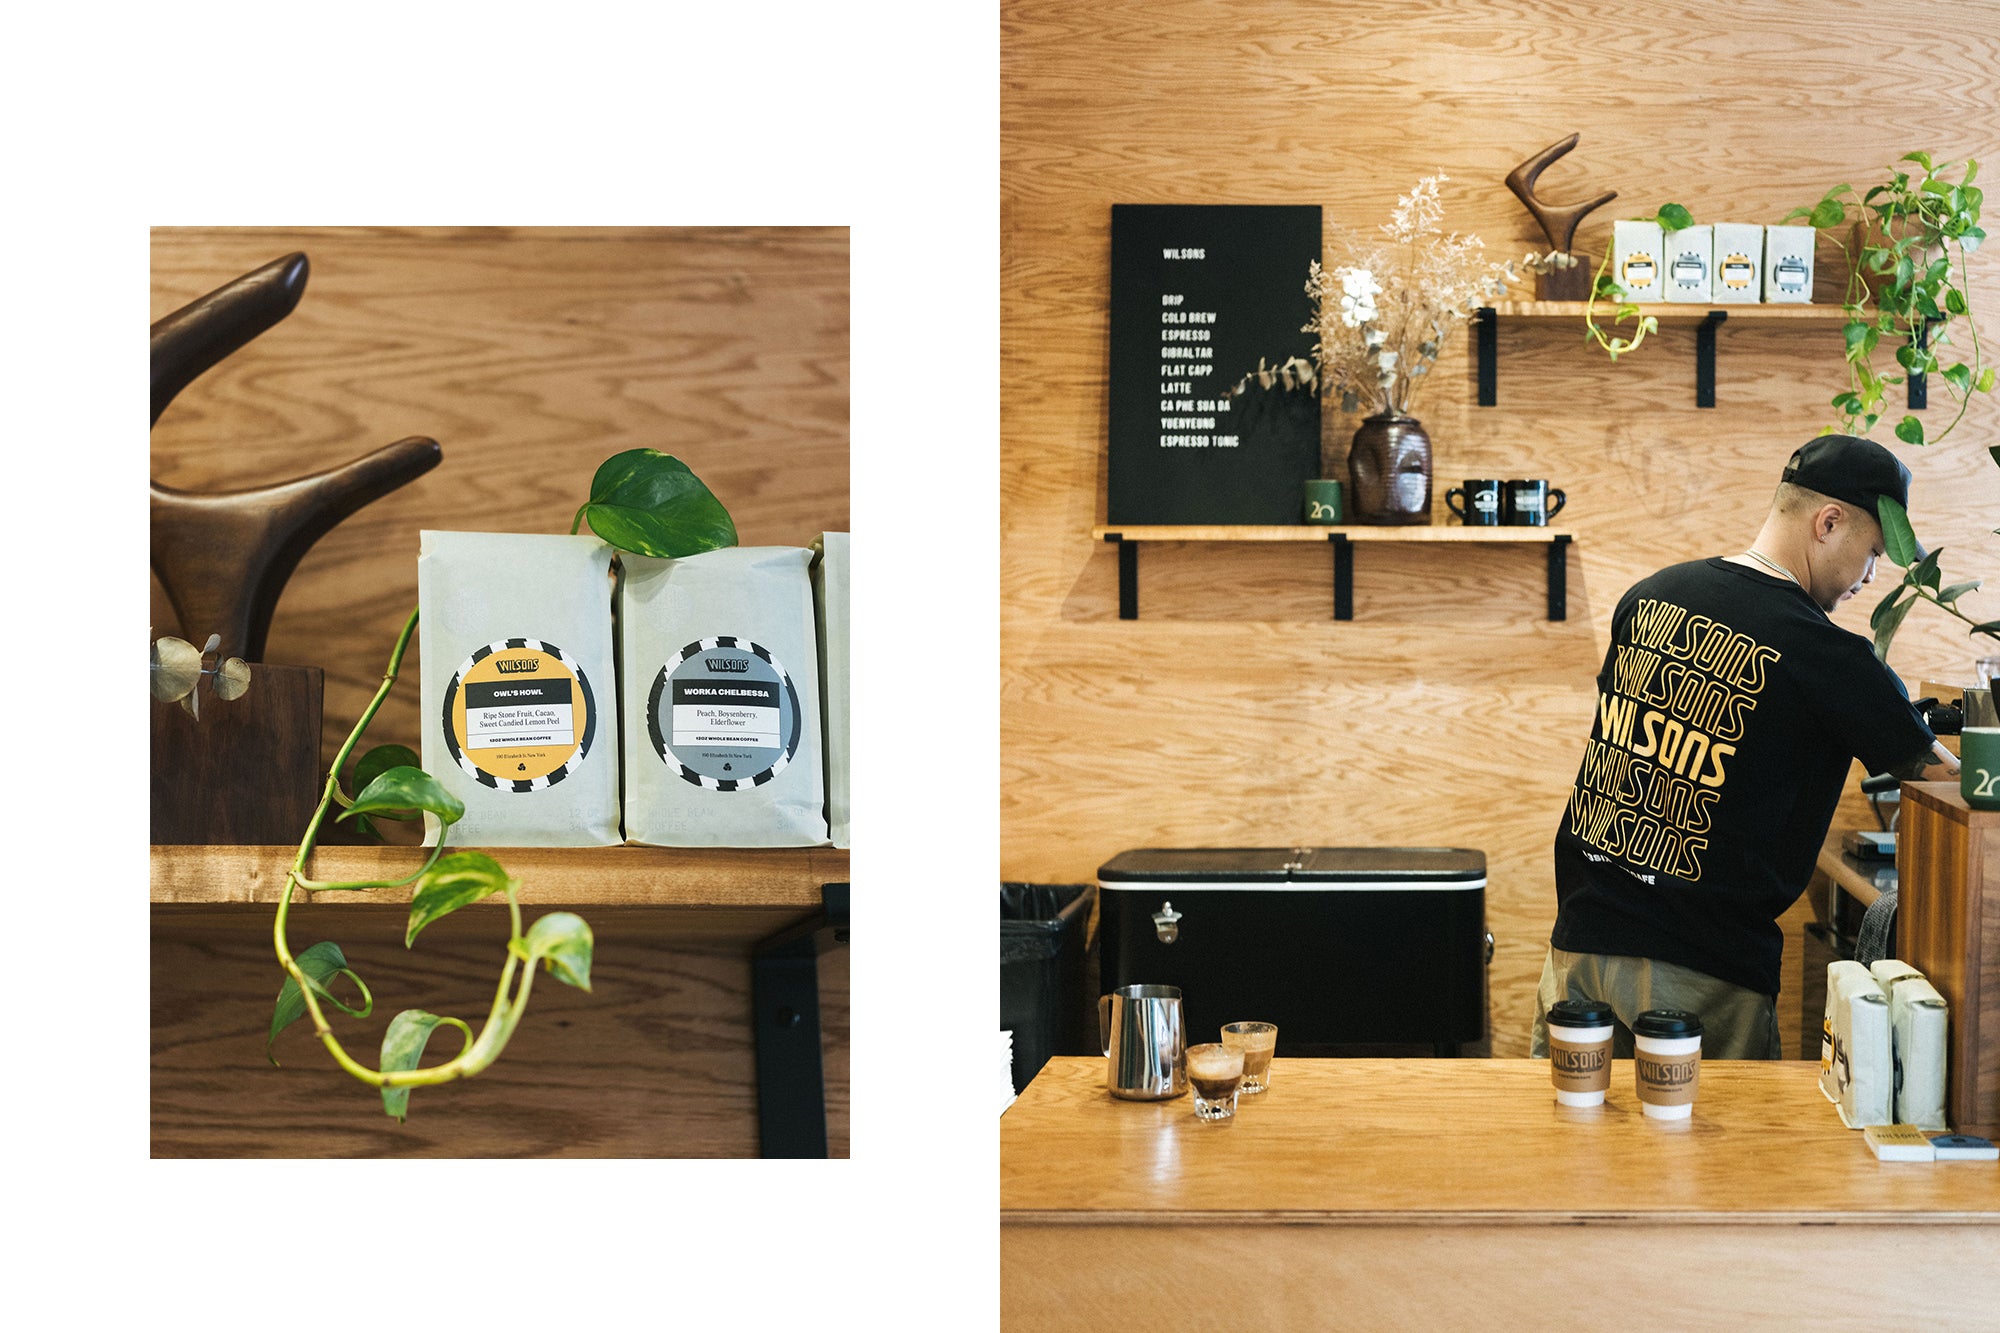 A diptych of a coffee setup in a wooden enclosed space.